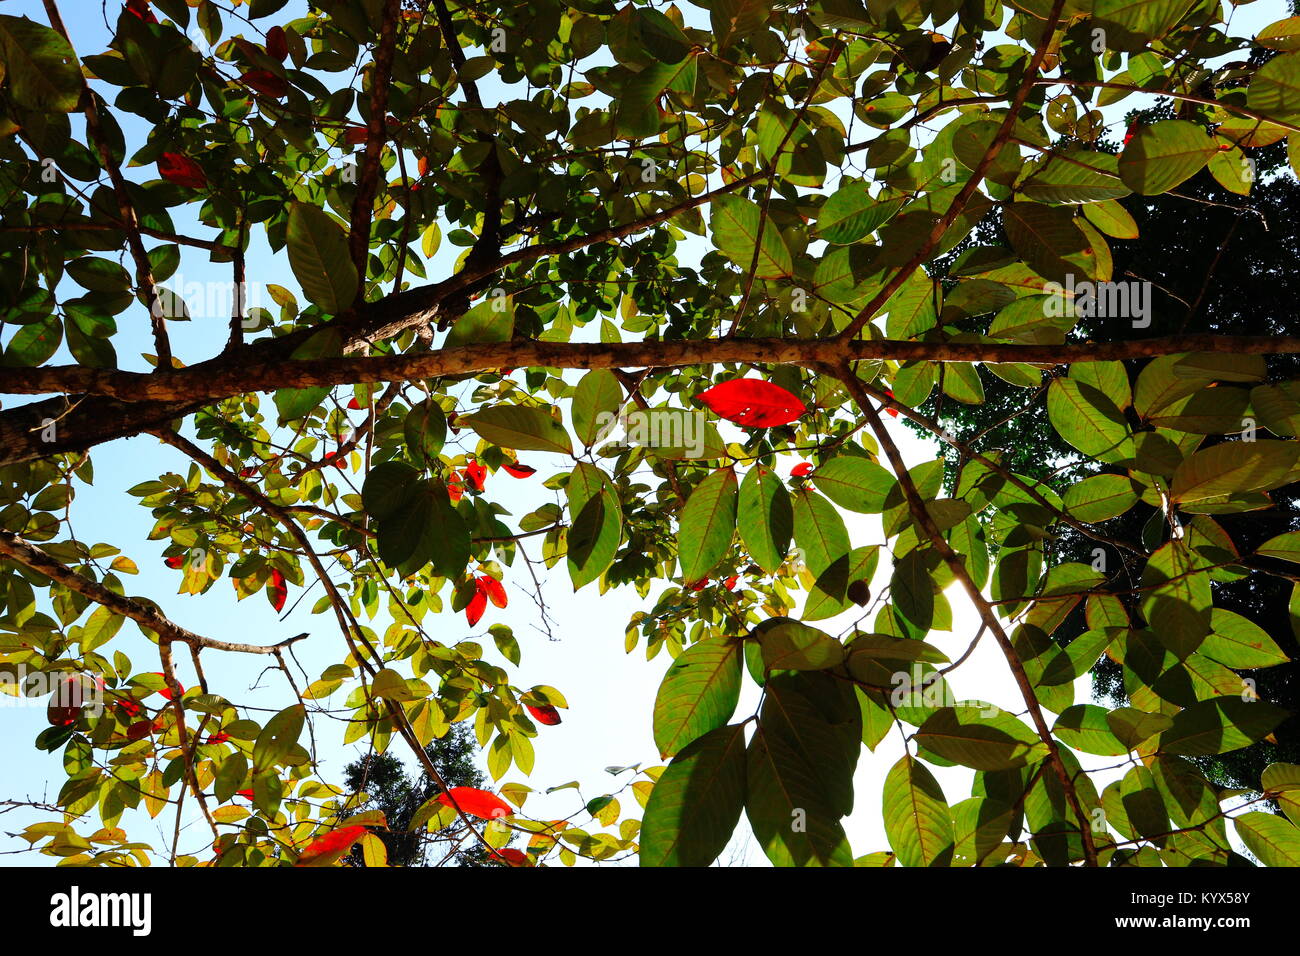 Autumn leaves against the sky, Autumn leaves with sunbeam Stock Photo